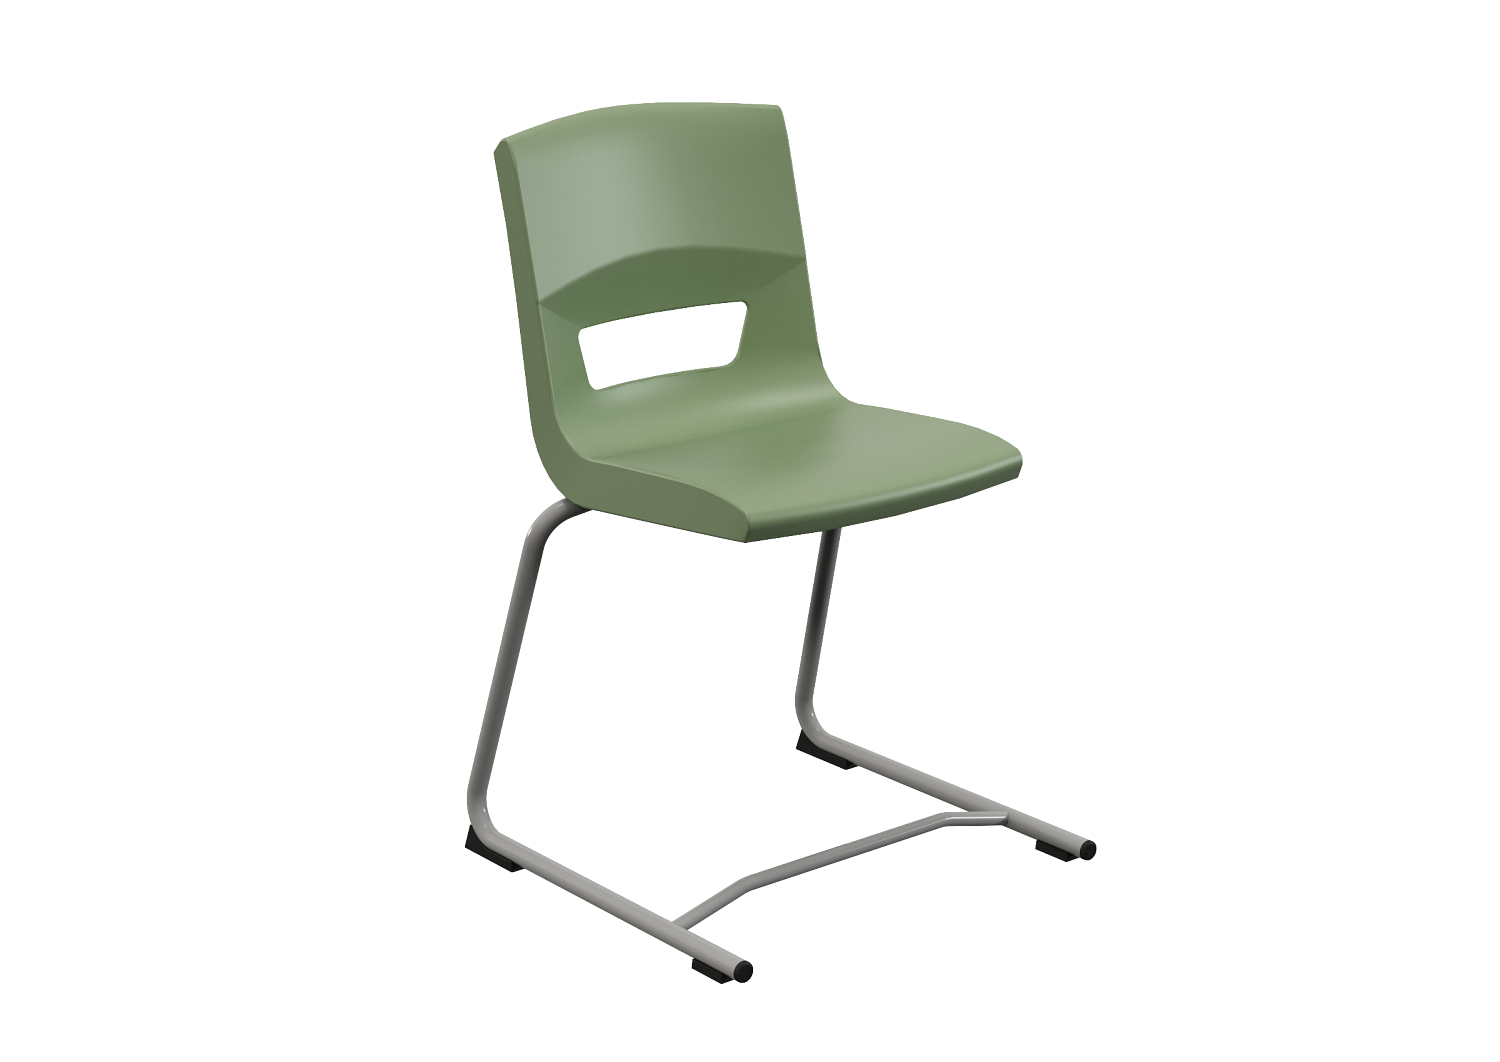 Postura reverse cantilever chair for classrom and kitchen in moss green